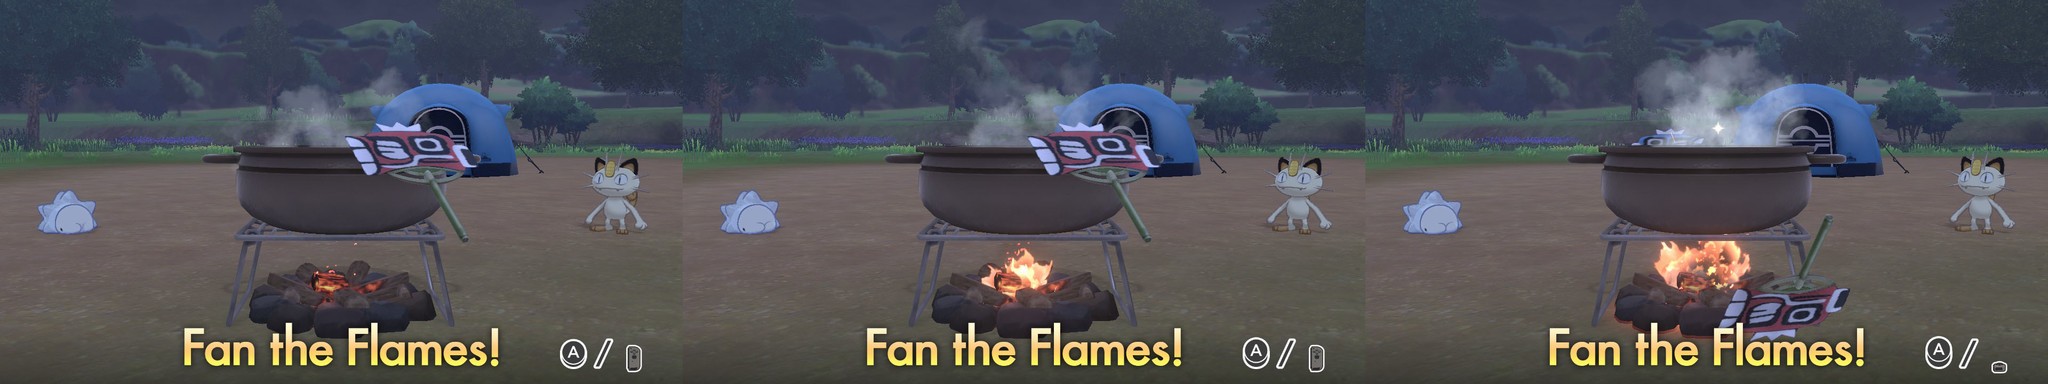 Pokemon Sword and Shield cooking fanning the flame